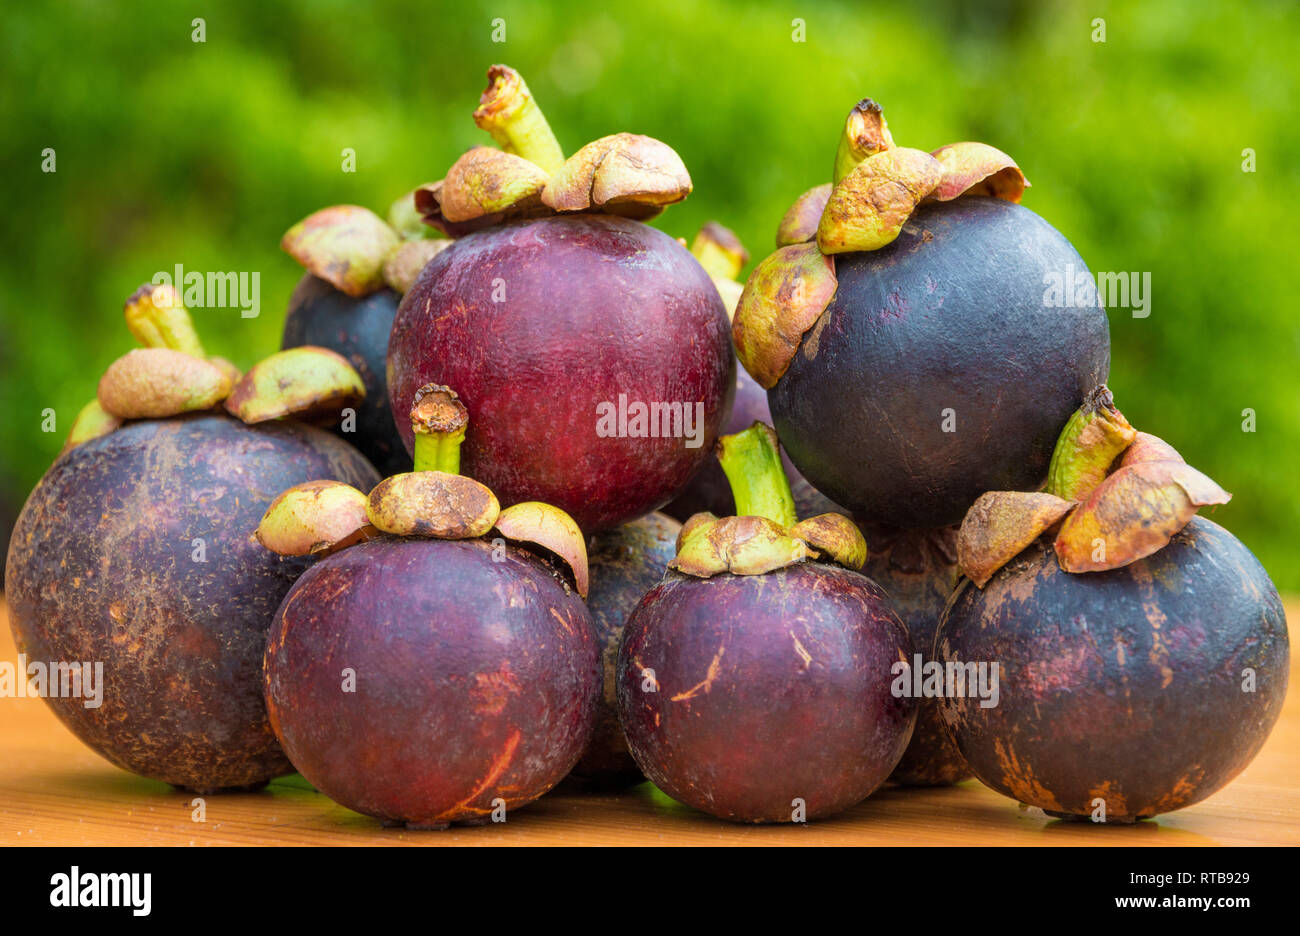 Nice picture of several mangosteen (Garcinia mangostana) fruits, stacked on top of each other on a wooden table. The fruits with their reddish-purple... Stock Photo